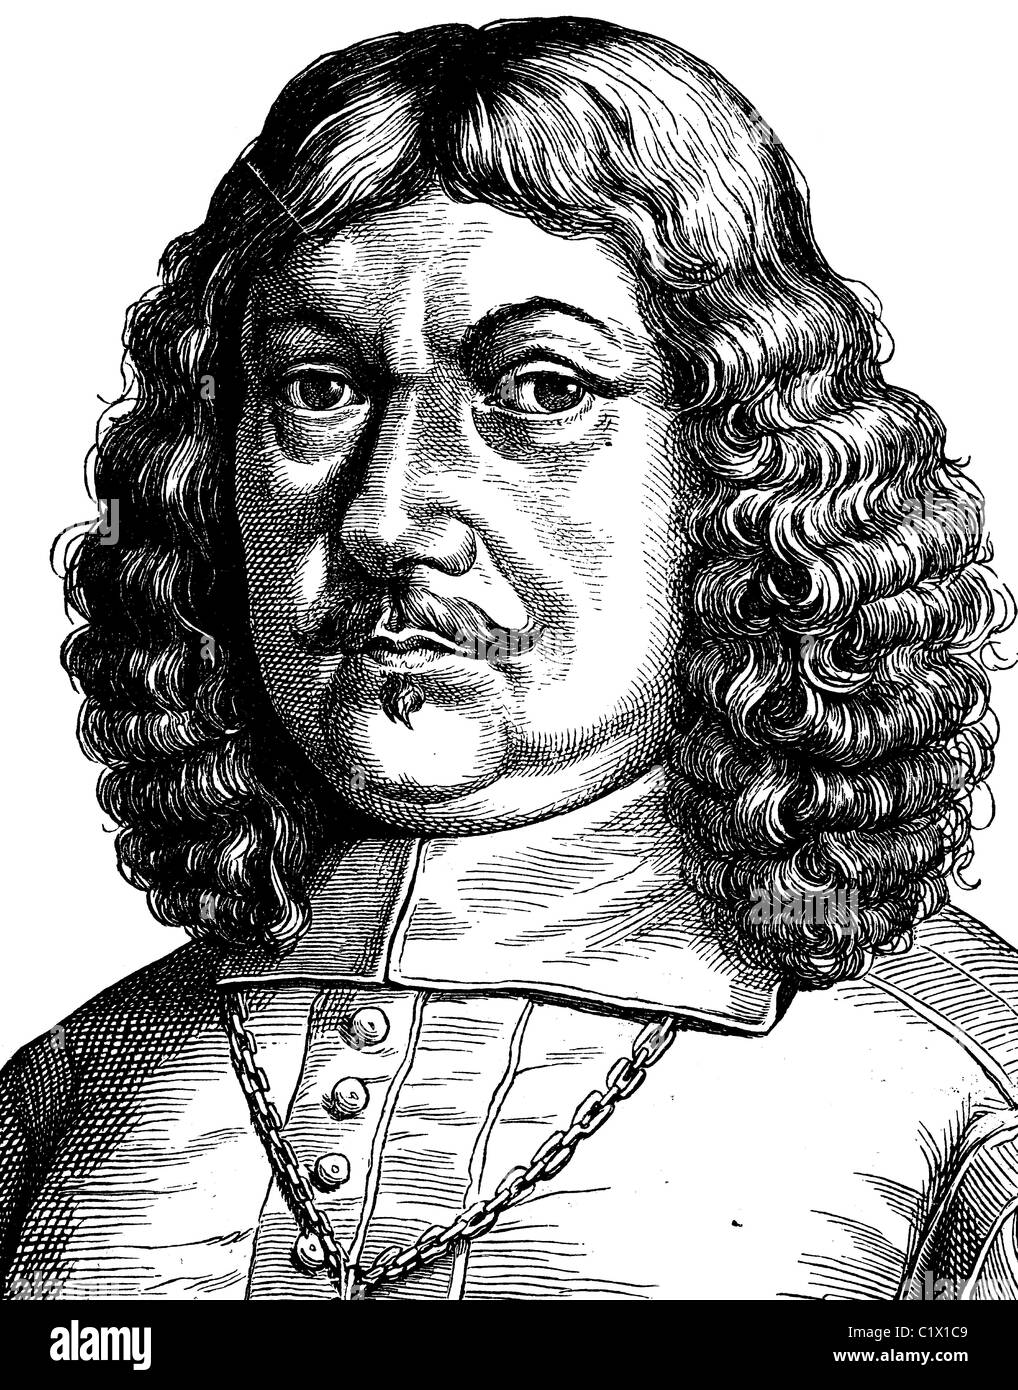 Digital improved image of Benedict Carpzov the Younger, criminal law and witch theorist, 1595 - 1666, historical illustration, p Stock Photo